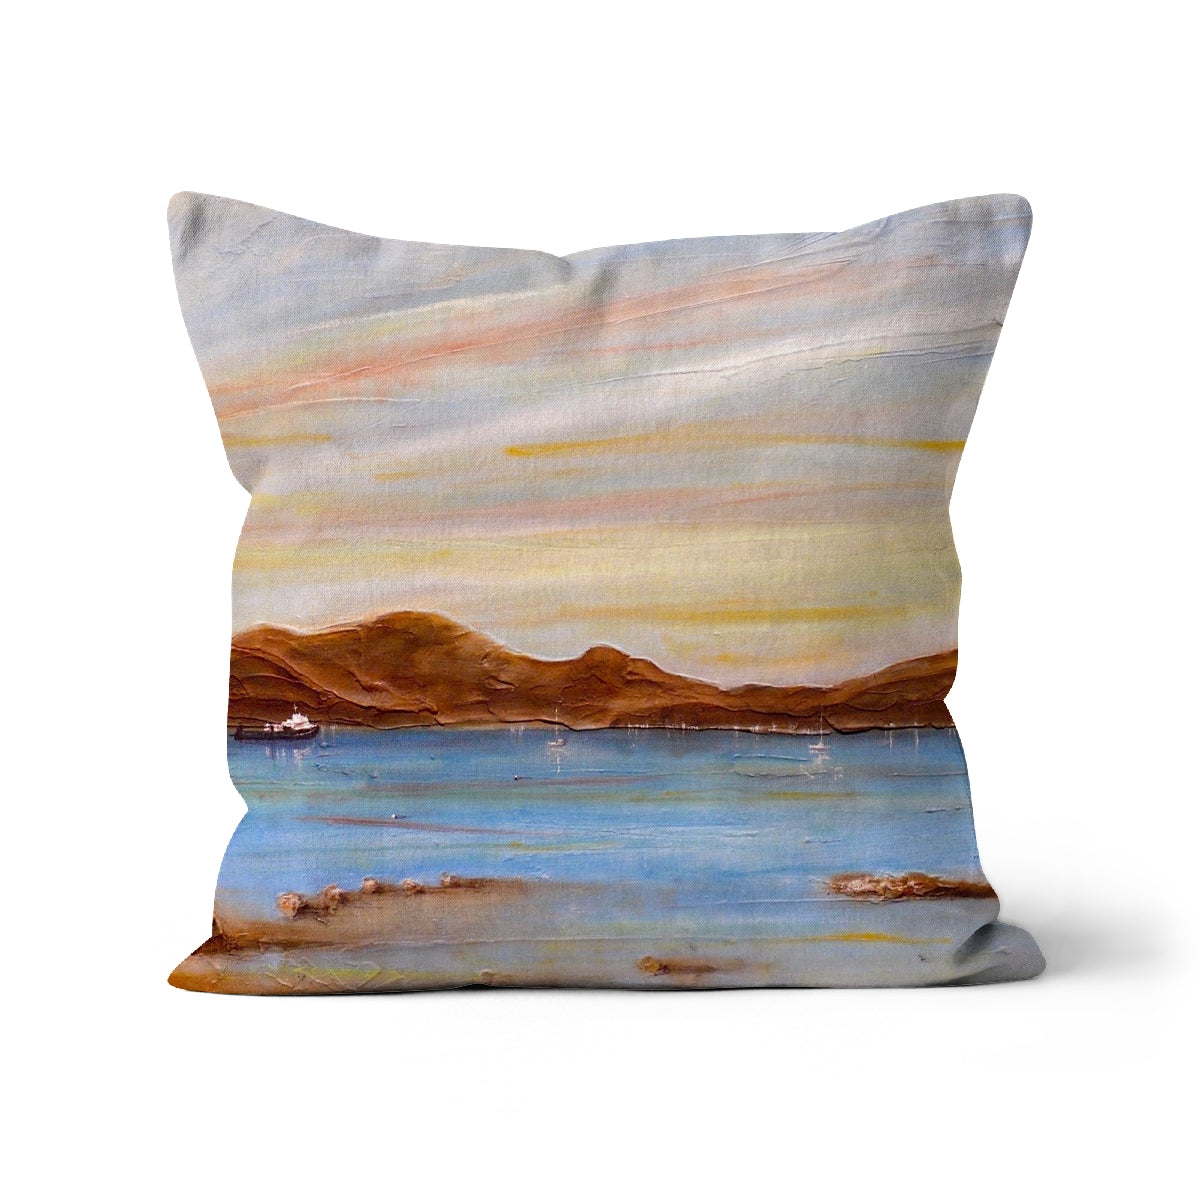 The Last Ferry To Dunoon Art Gifts Cushion-Cushions-River Clyde Art Gallery-Linen-12"x12"-Paintings, Prints, Homeware, Art Gifts From Scotland By Scottish Artist Kevin Hunter